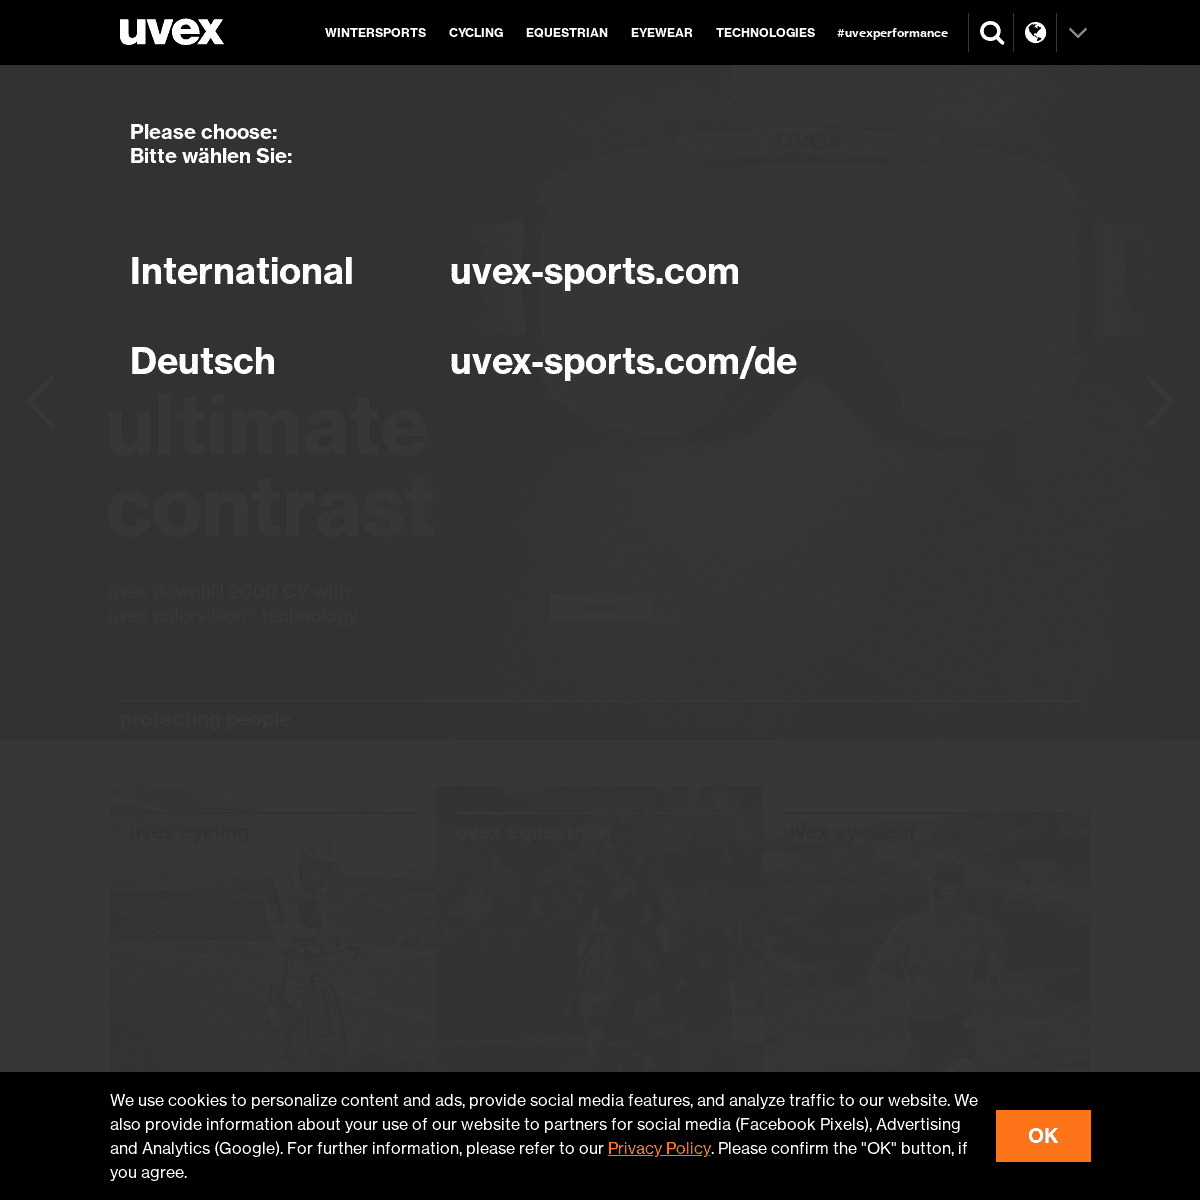 A complete backup of uvex-sports.com